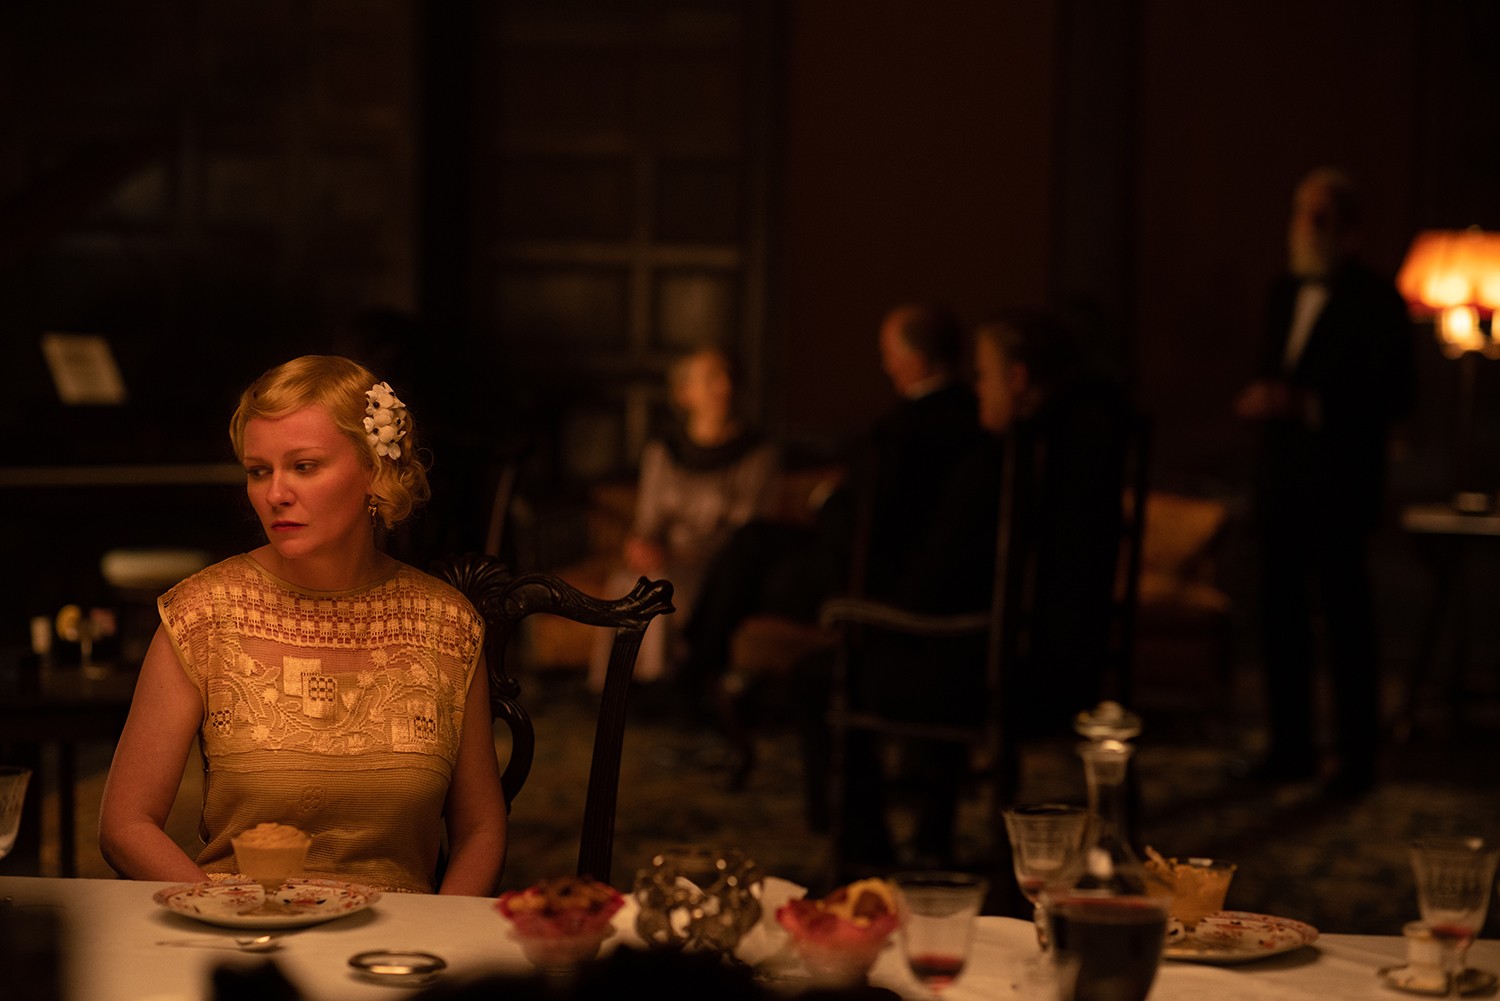 THE POWER OF THE DOG : KIRSTEN DUNST as ROSE GORDON in THE POWER OF THE DOG. Cr. KIRSTY GRIFFIN/NETFLIX © 2021 (Foto: KIRSTY GRIFFIN/NETFLIX © 2021)